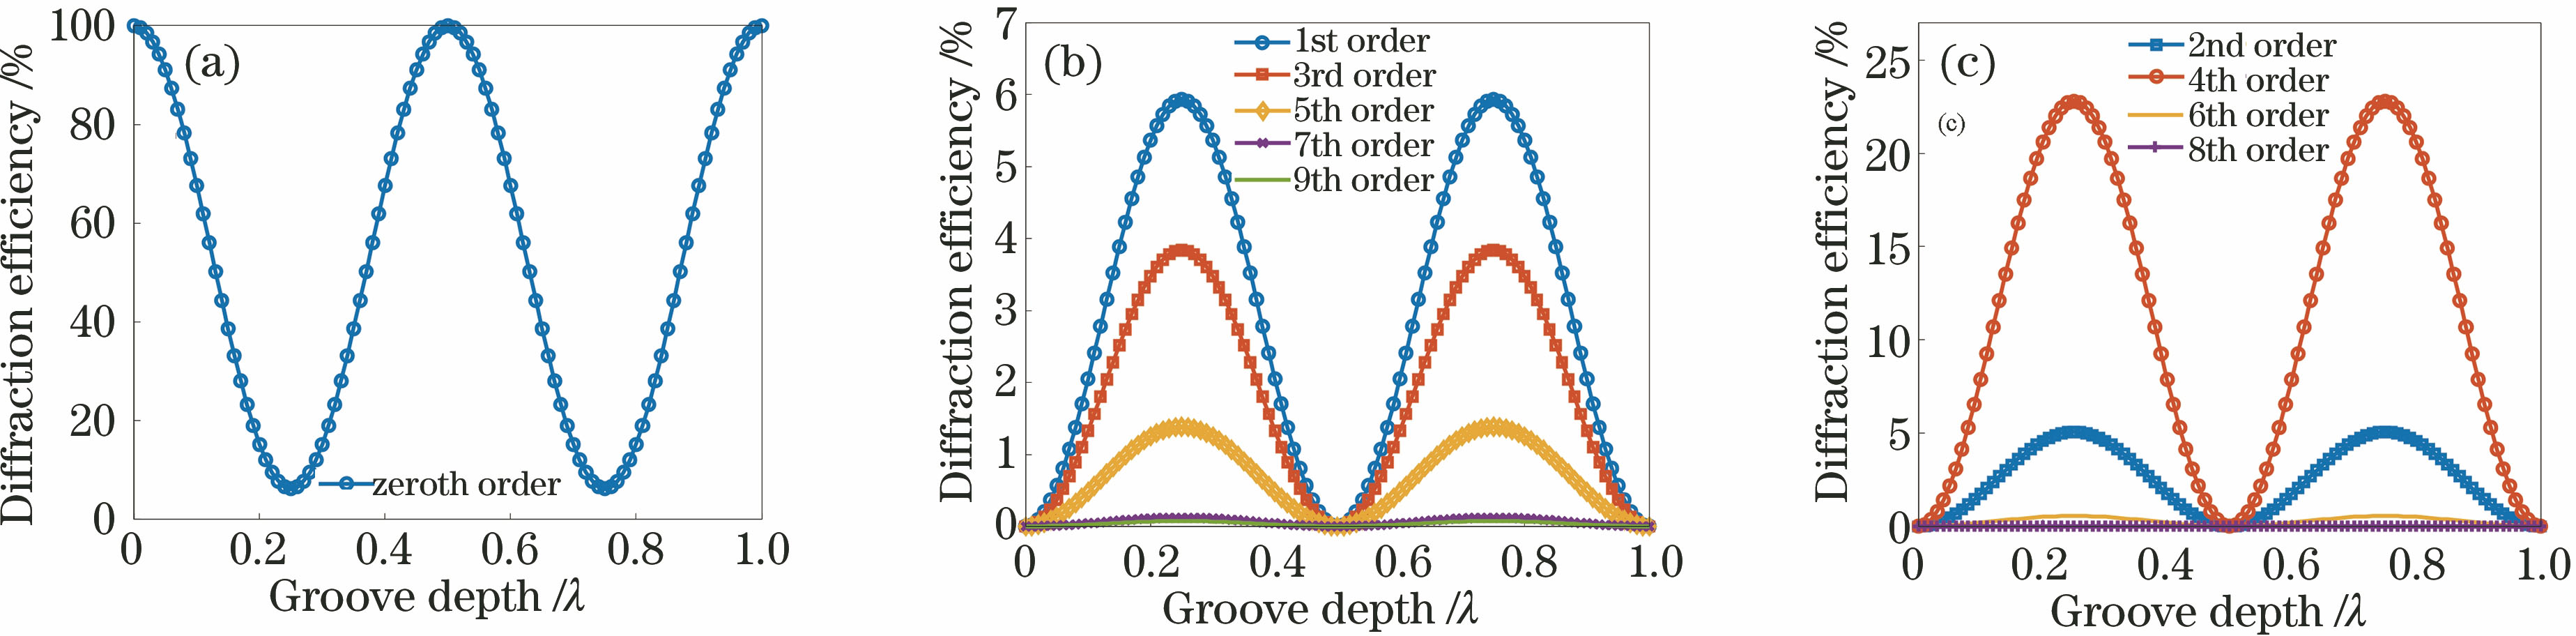 Diffraction efficiency of 0th-9th order signals as a function of groove depth. (a) Zero order; (b) odd diffraction orders; (c) even diffraction orders